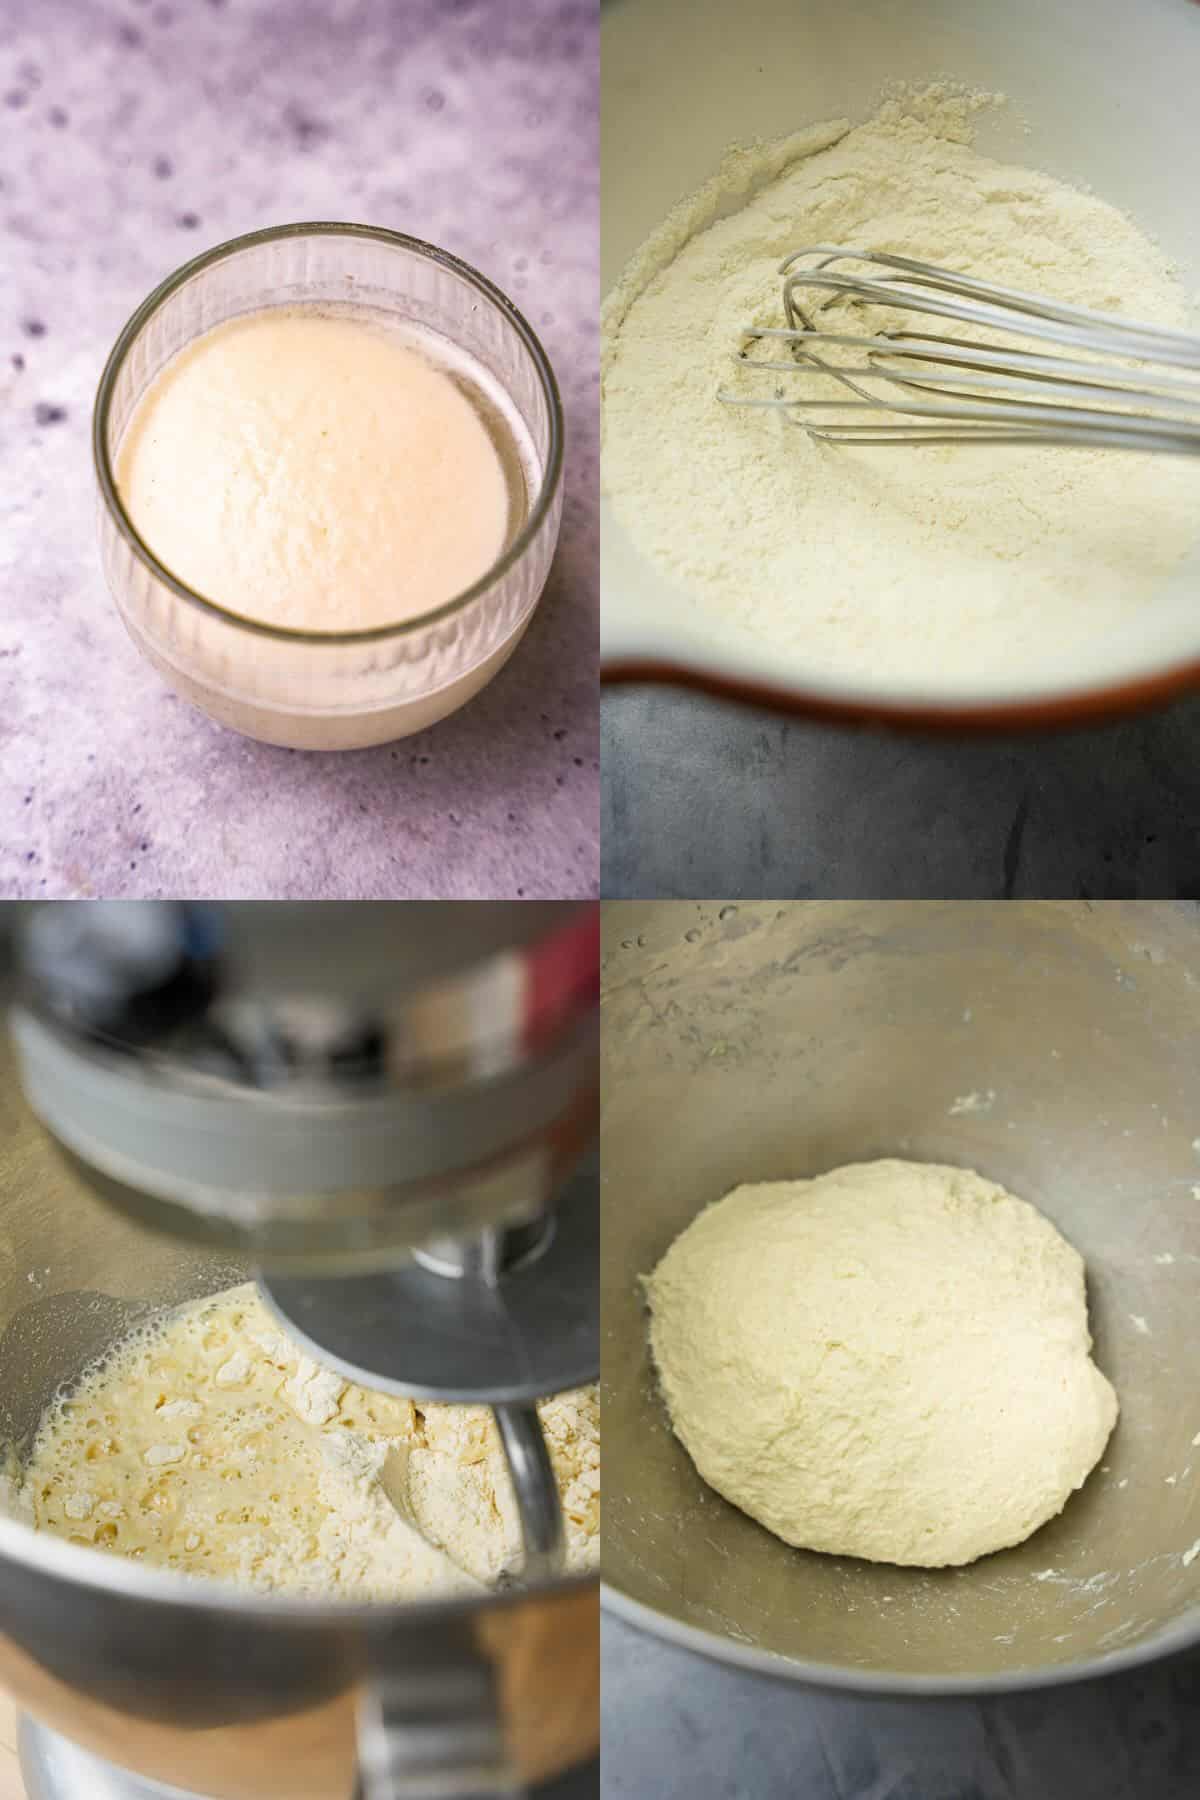 A collage of photos showing the process of proofing yeast and then making msemen dough in a mixer.